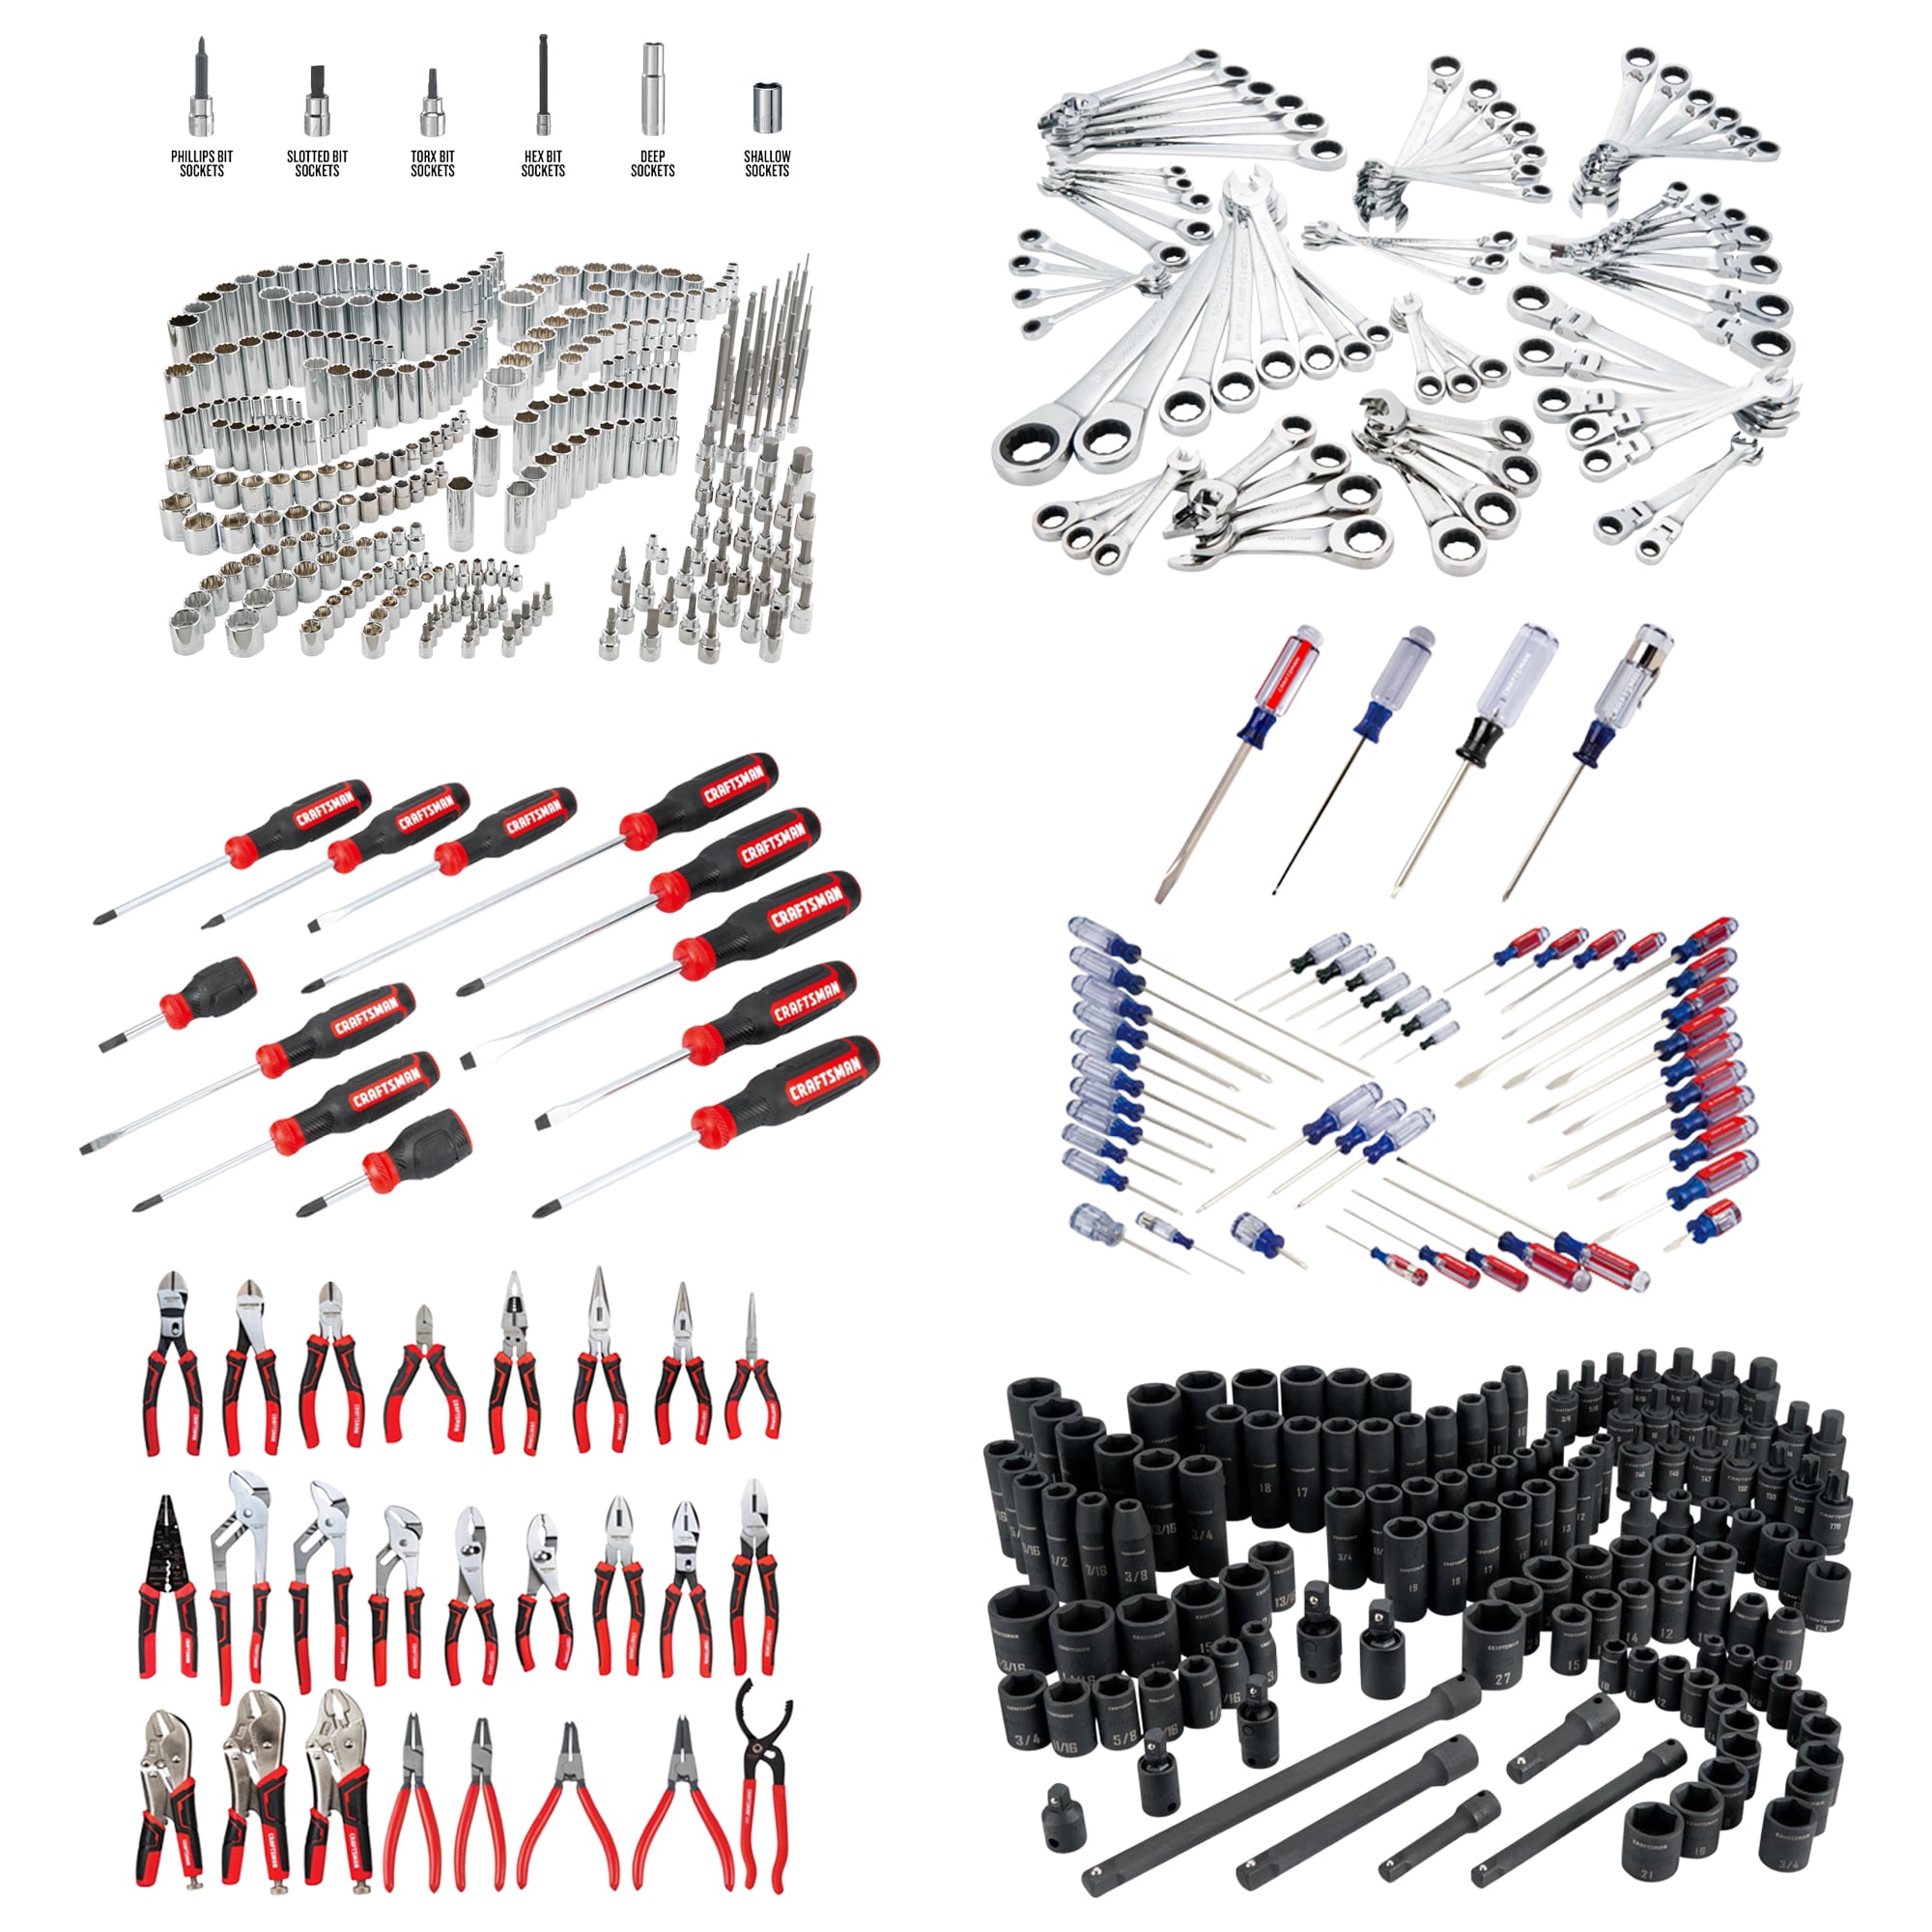 CRAFTSMAN 543-Piece Standard (SAE) and Metric Combination Chrome Mechanics  Tool Set in the Mechanics Tool Sets department at